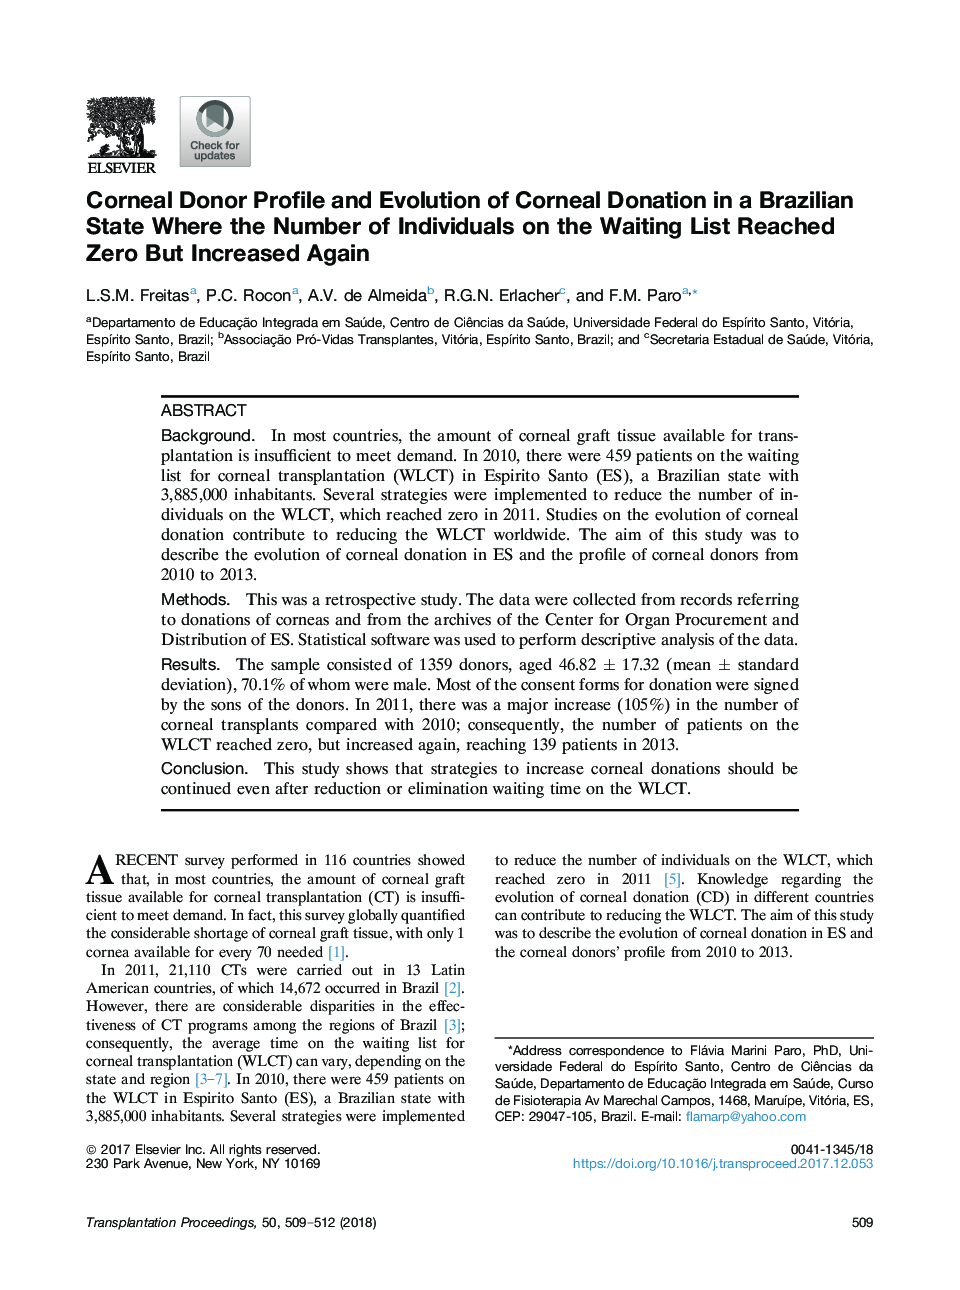 Corneal Donor Profile and Evolution of Corneal Donation in a Brazilian State Where the Number of Individuals on the Waiting List Reached Zero But Increased Again